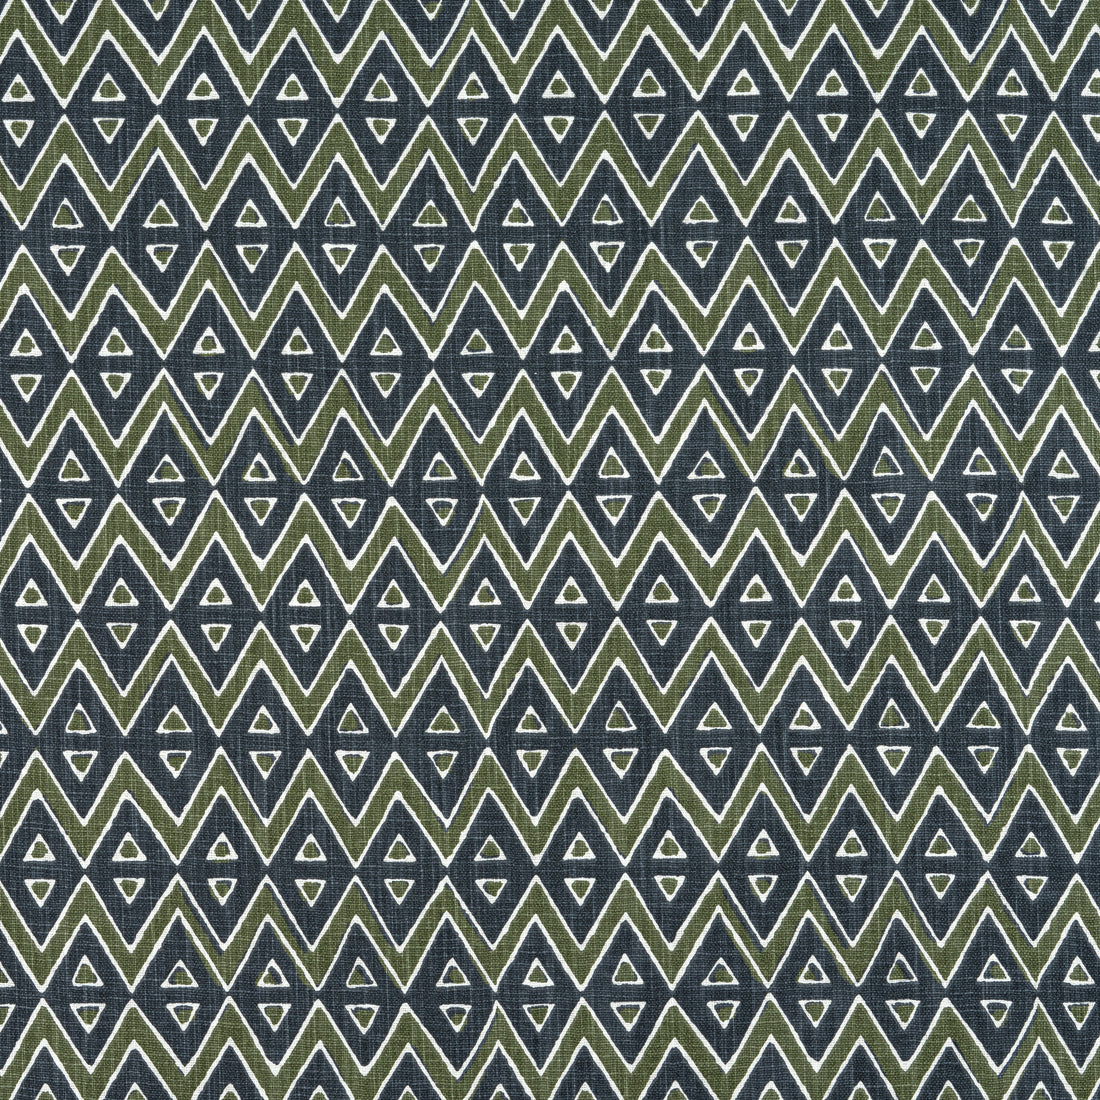 Tiburon fabric in green and bluestone color - pattern number F913235 - by Thibaut in the Mesa collection